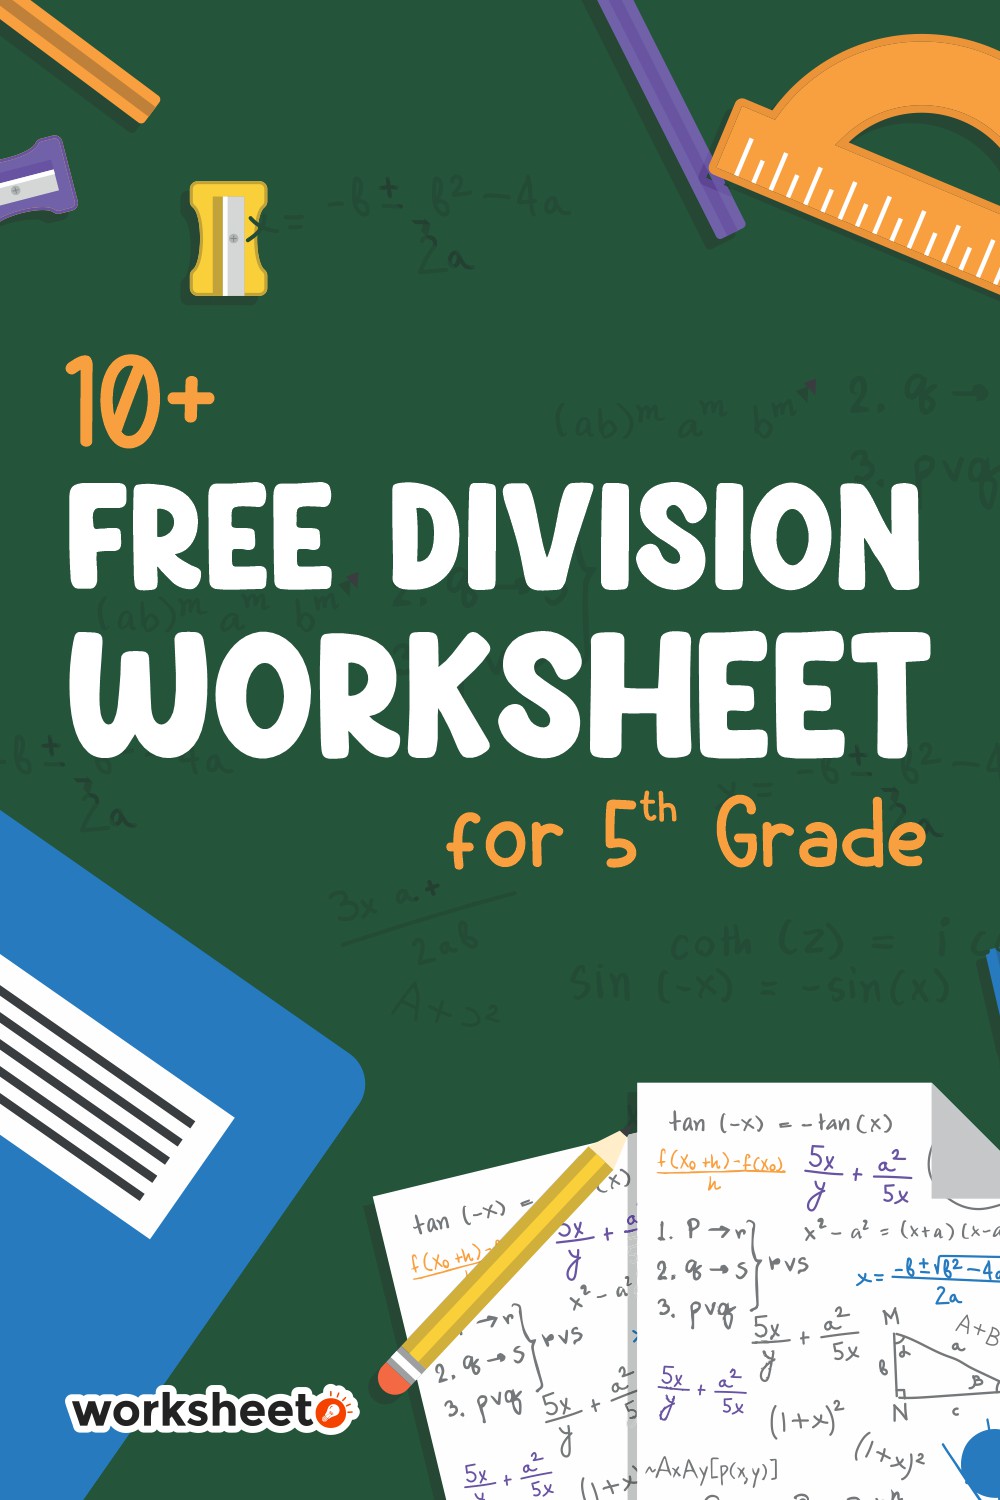 15 Images of  Division Worksheets For 5th Grade